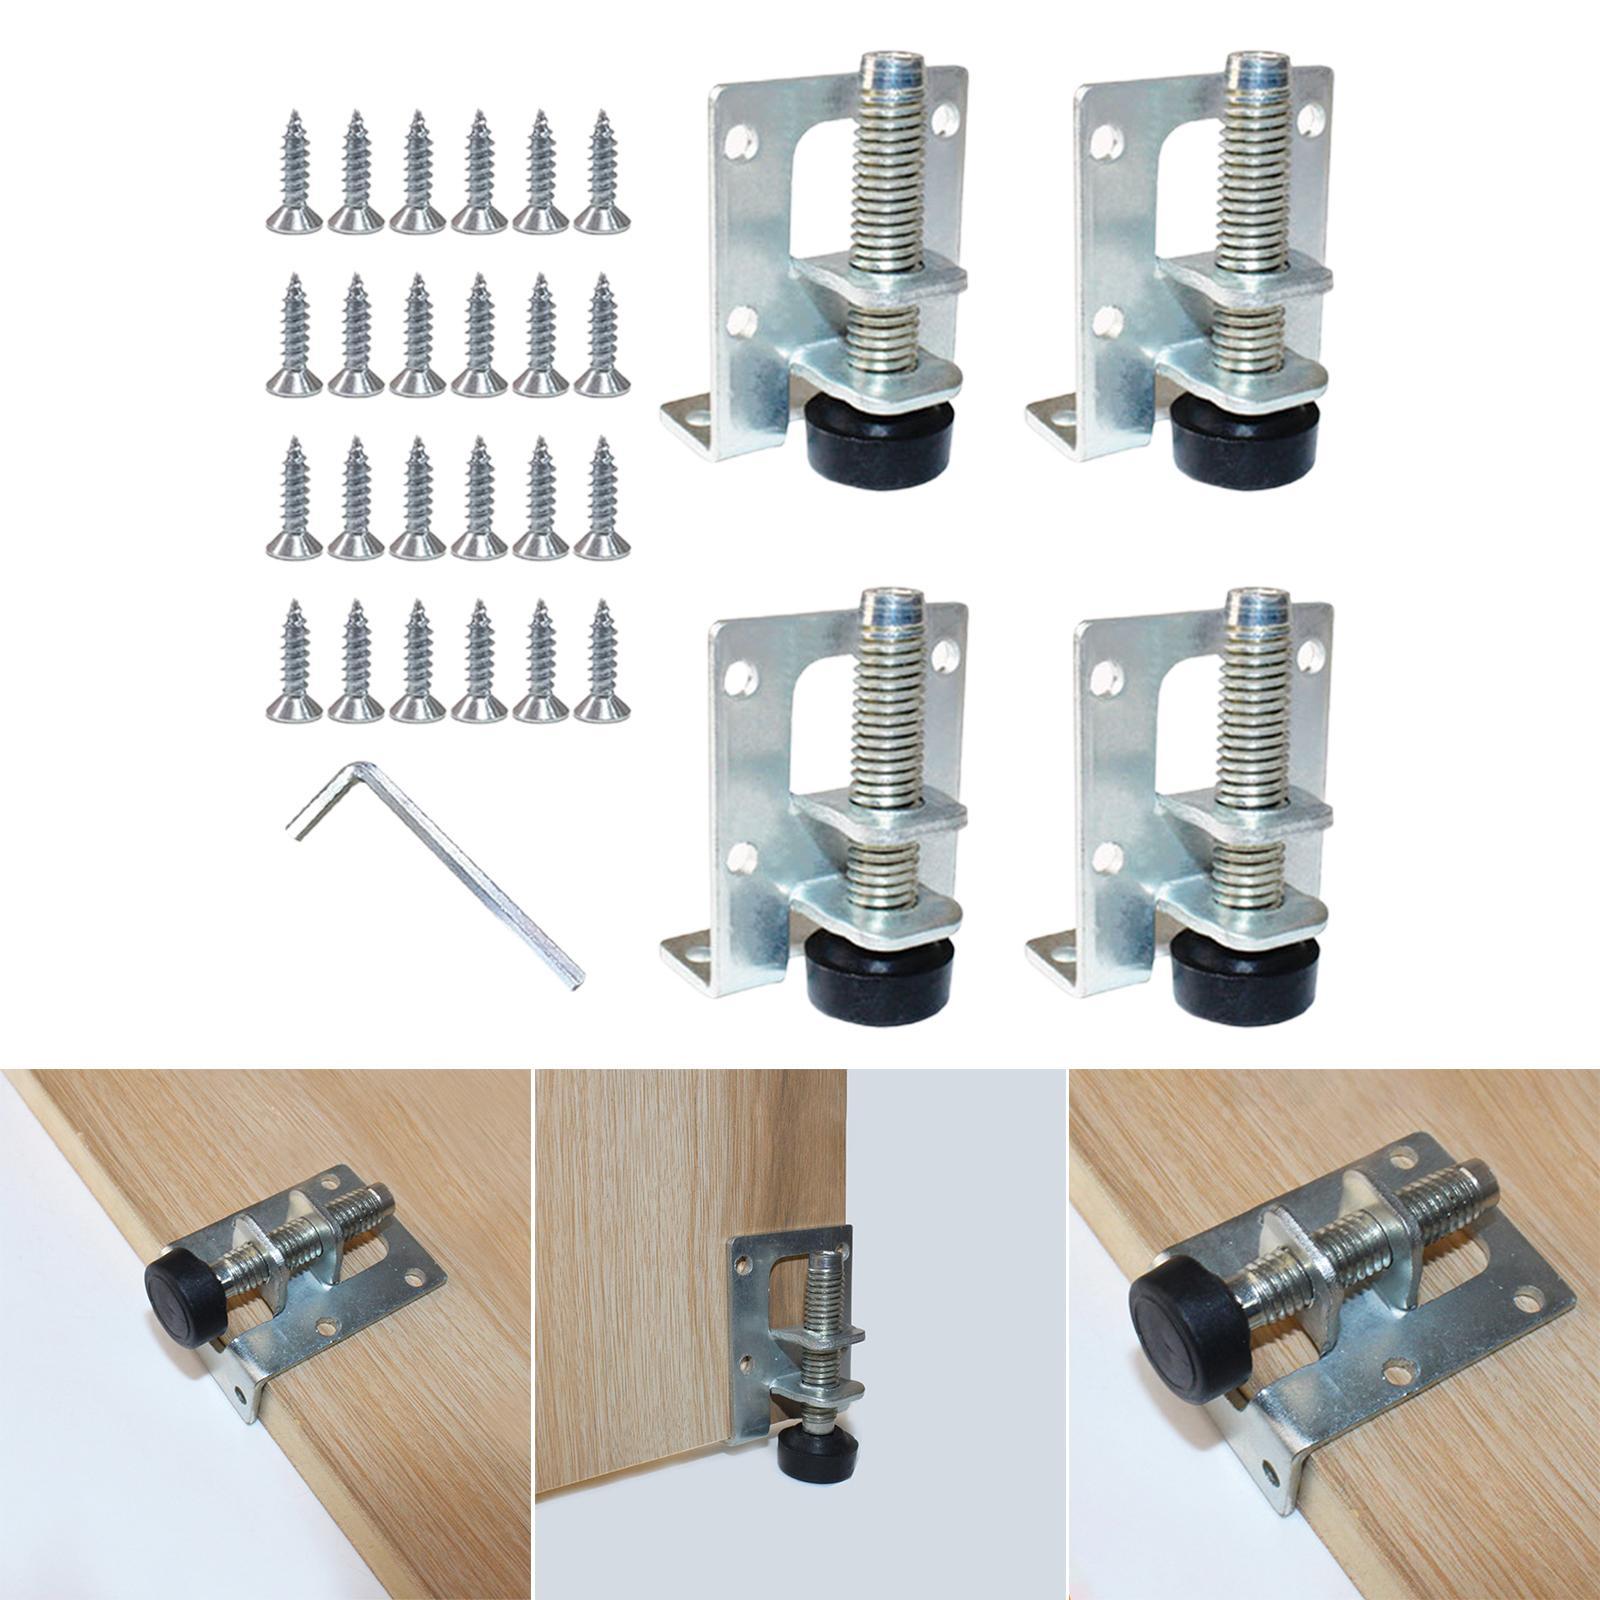 4 Pieces Furniture Leveler Legs Adjustable Supporting Feet for Sofa Couch